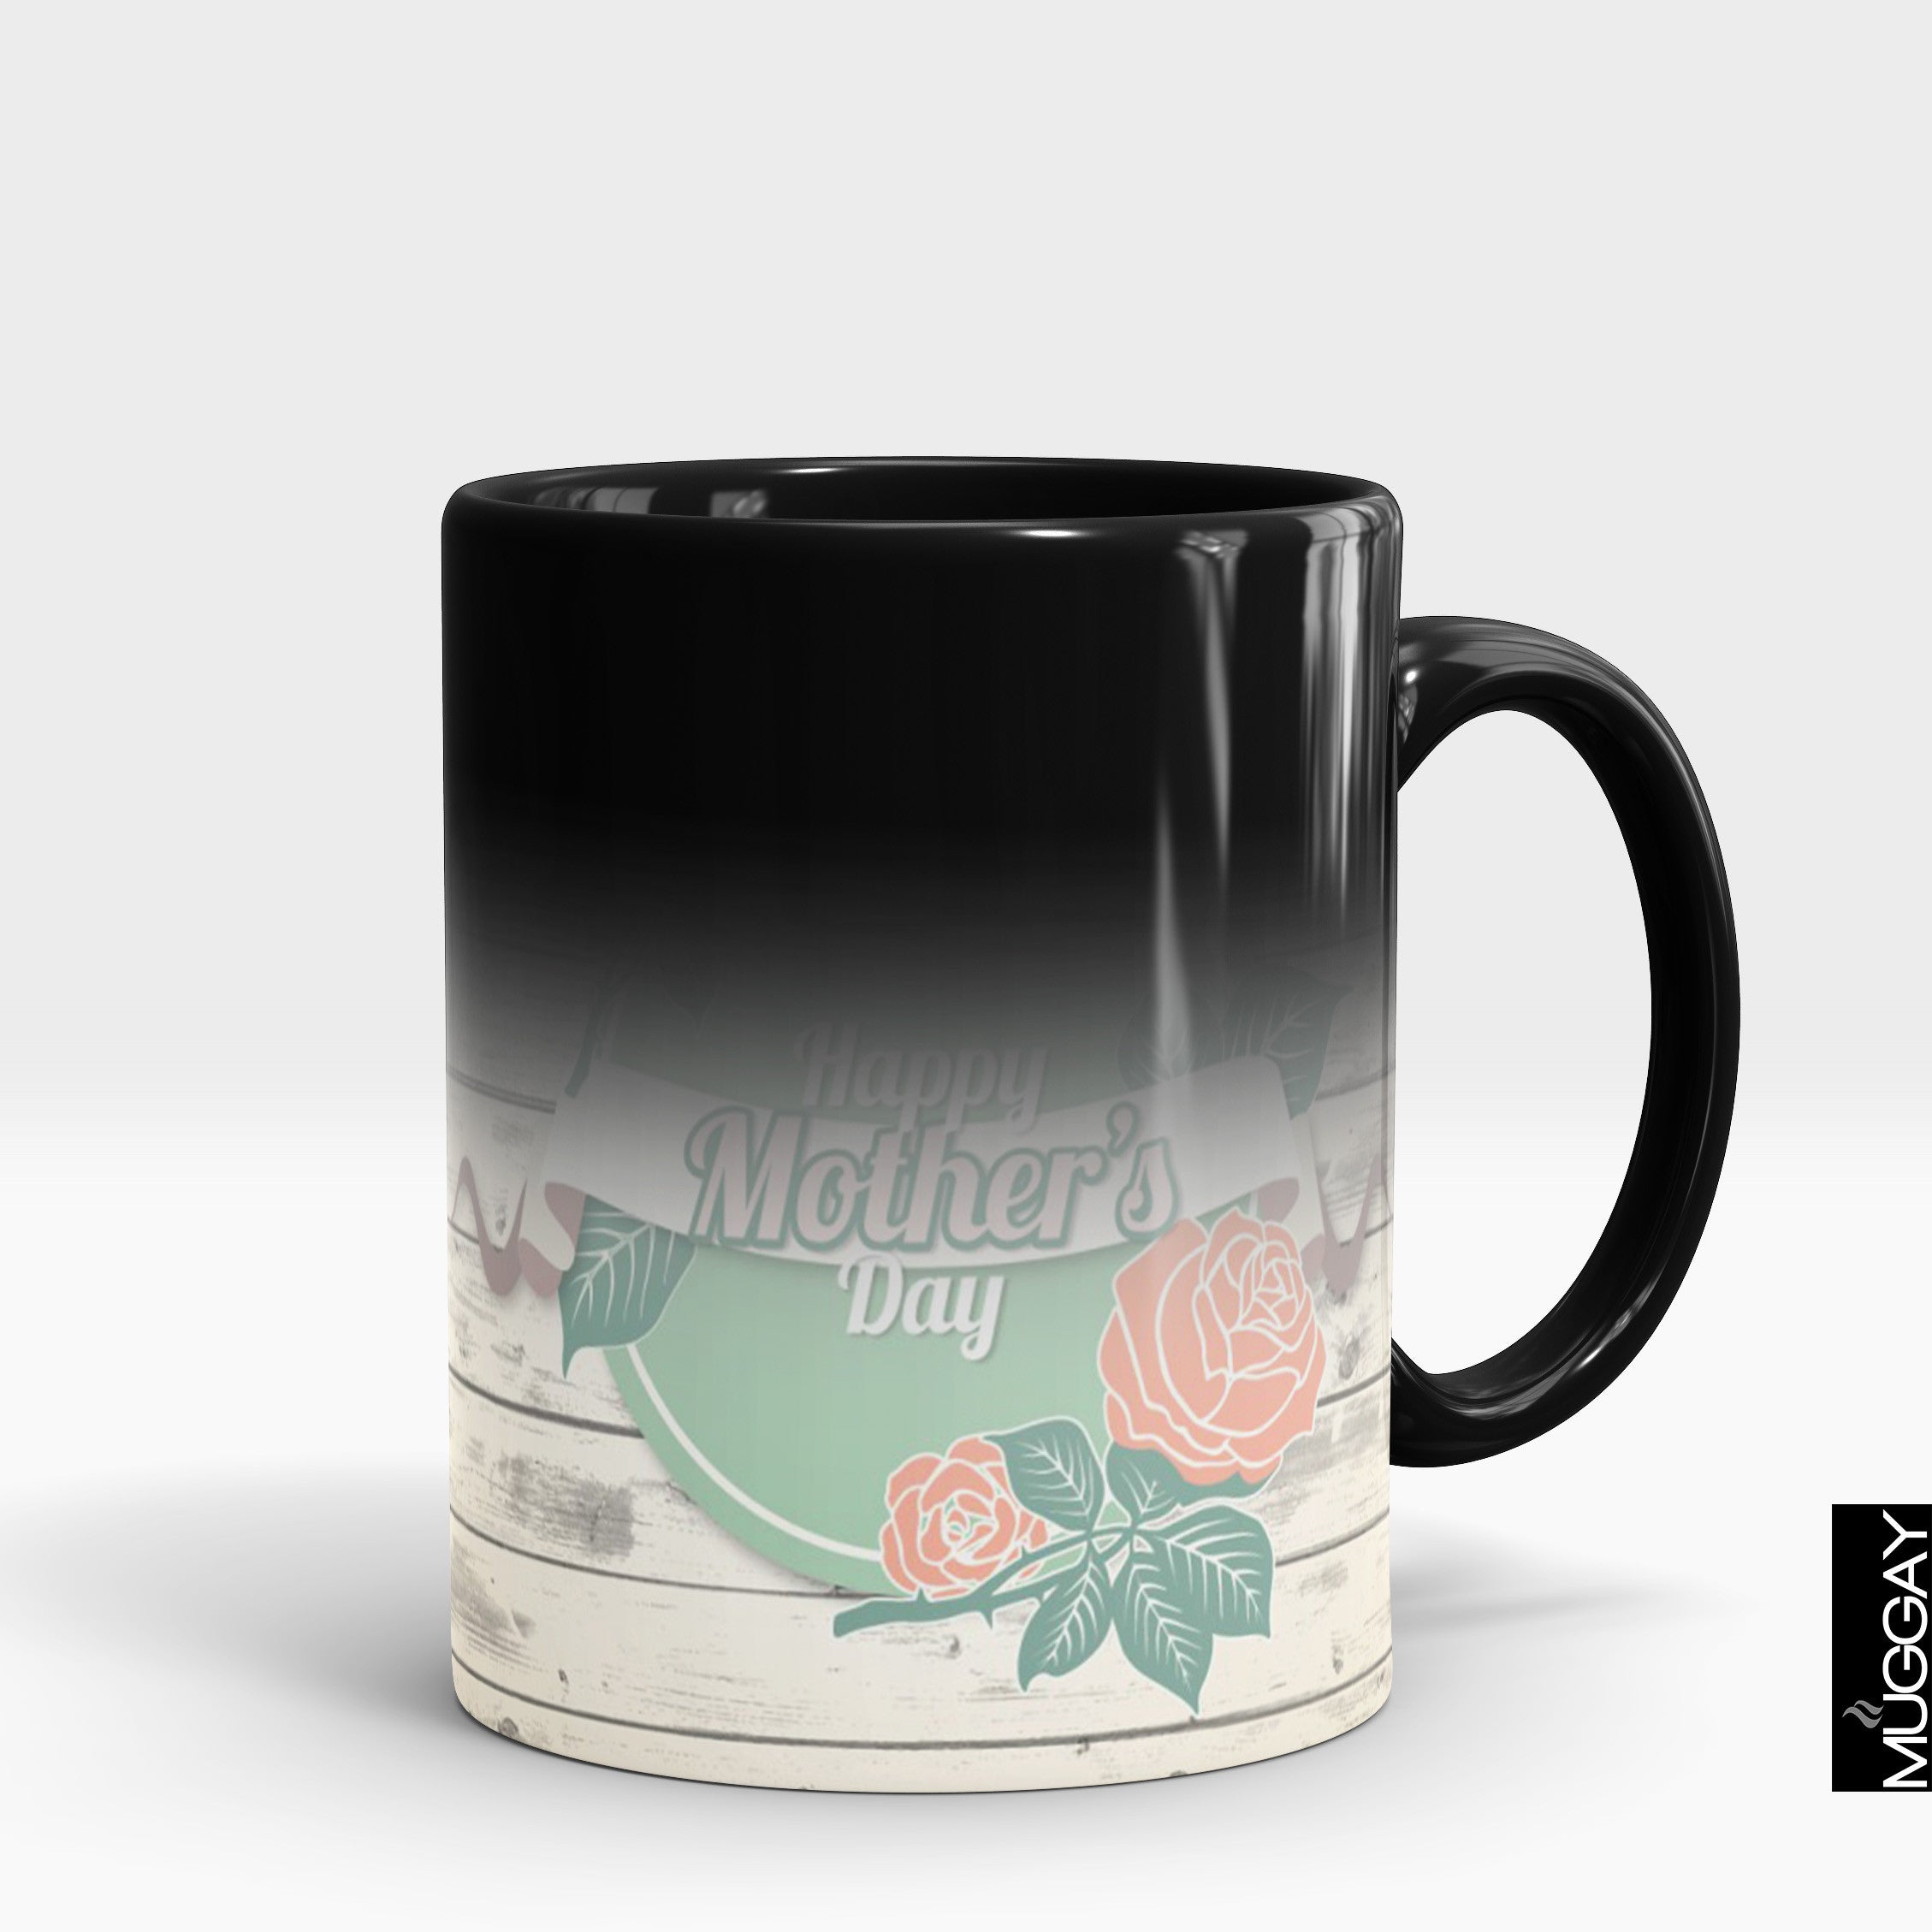 Mugs for Mothers -6